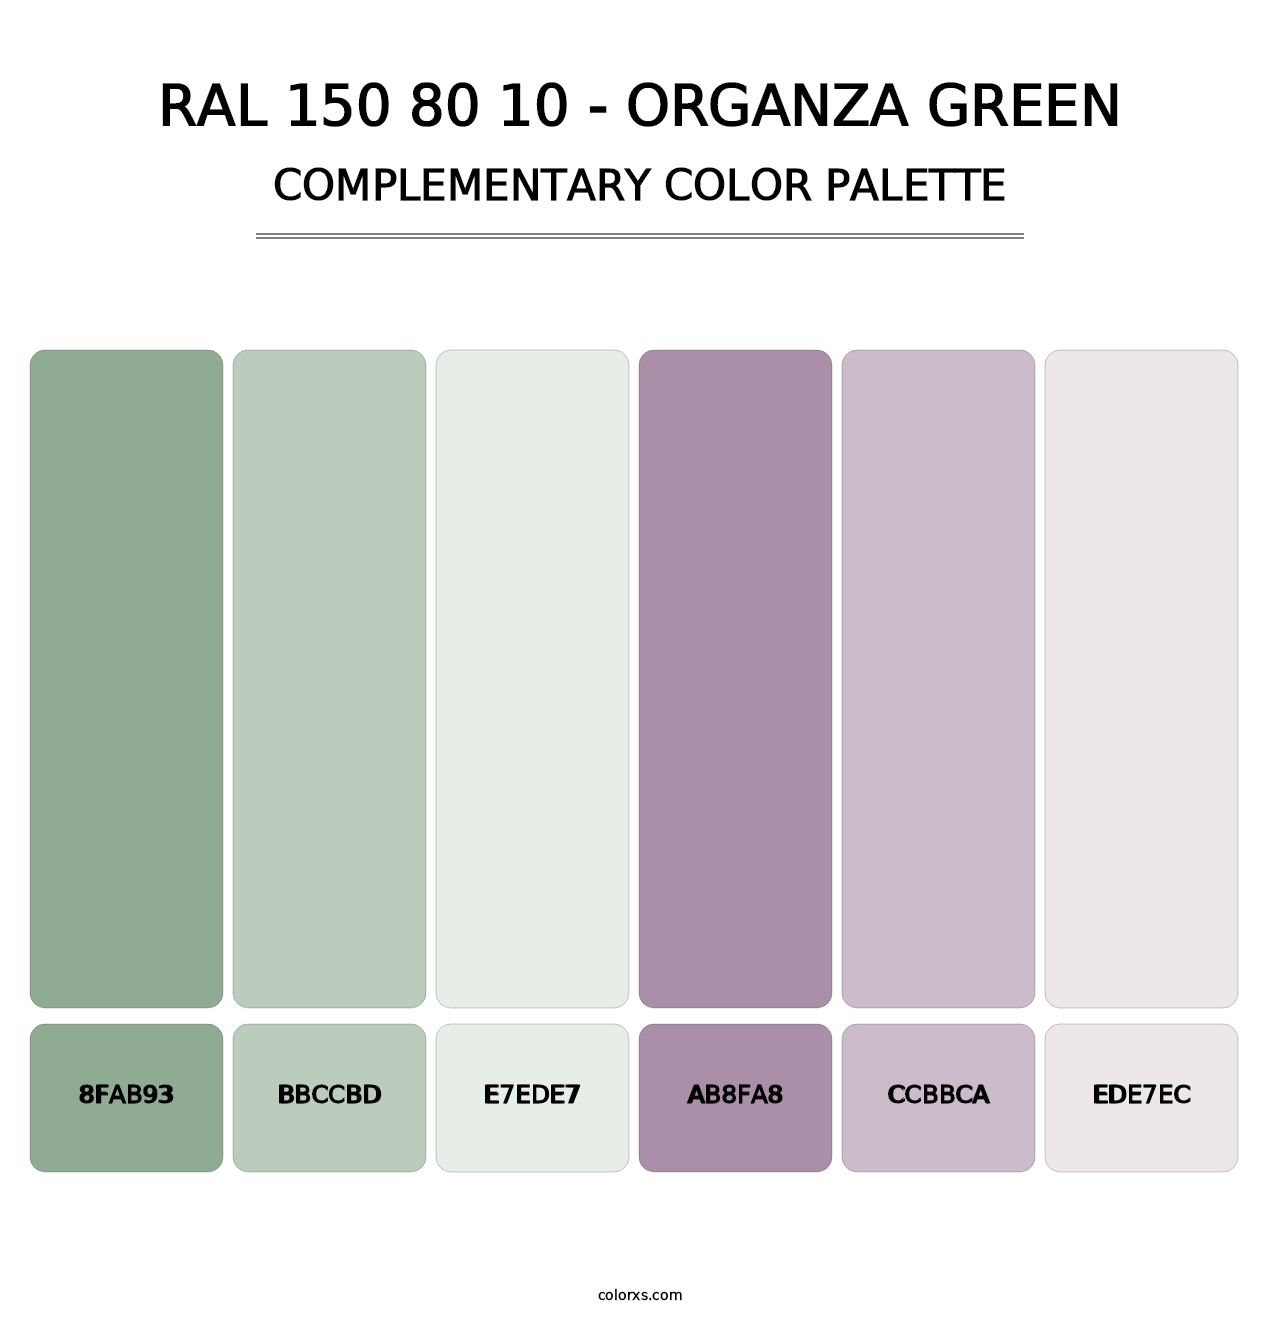 RAL 150 80 10 - Organza Green - Complementary Color Palette